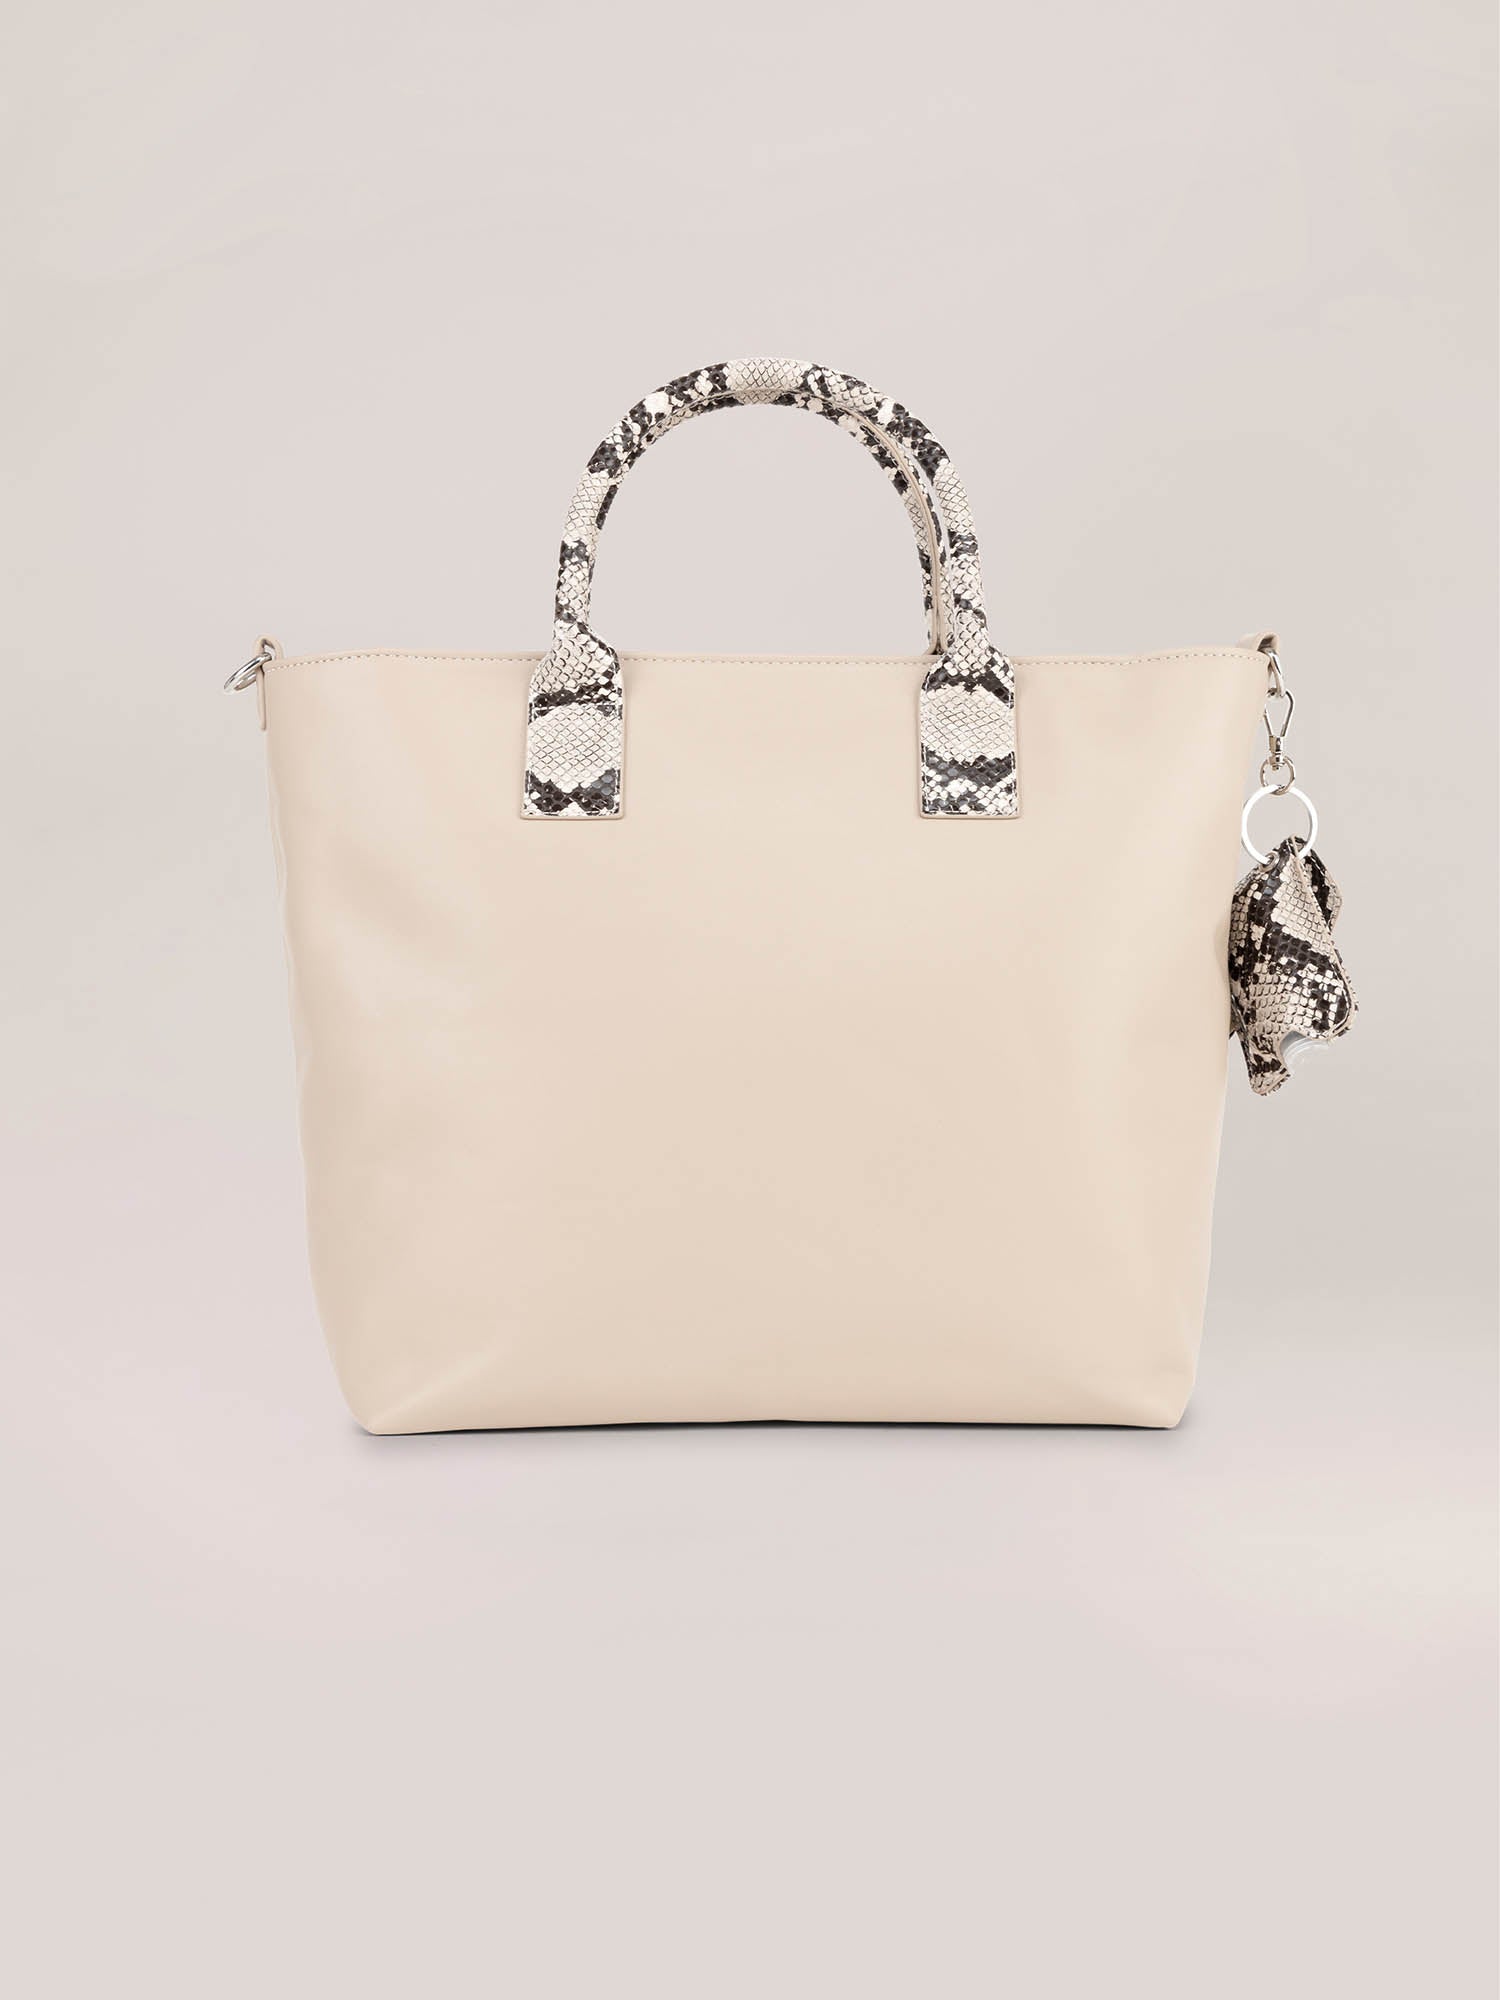 24-7 Tote - Taupe with upSCALE